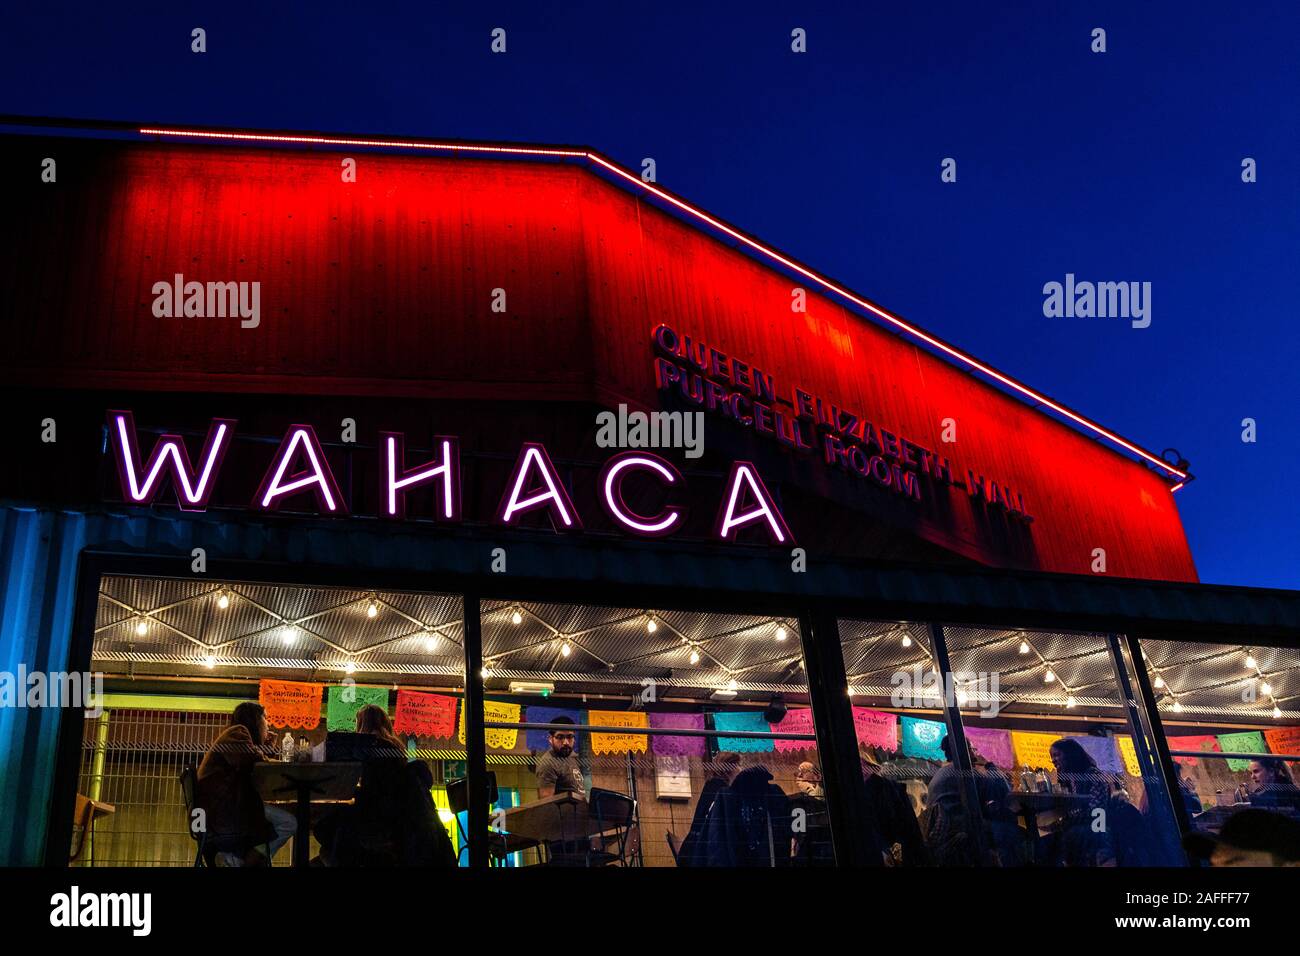 Exterior of Mexican restaurant Wahaca at night time in Southbank, London, UK Stock Photo